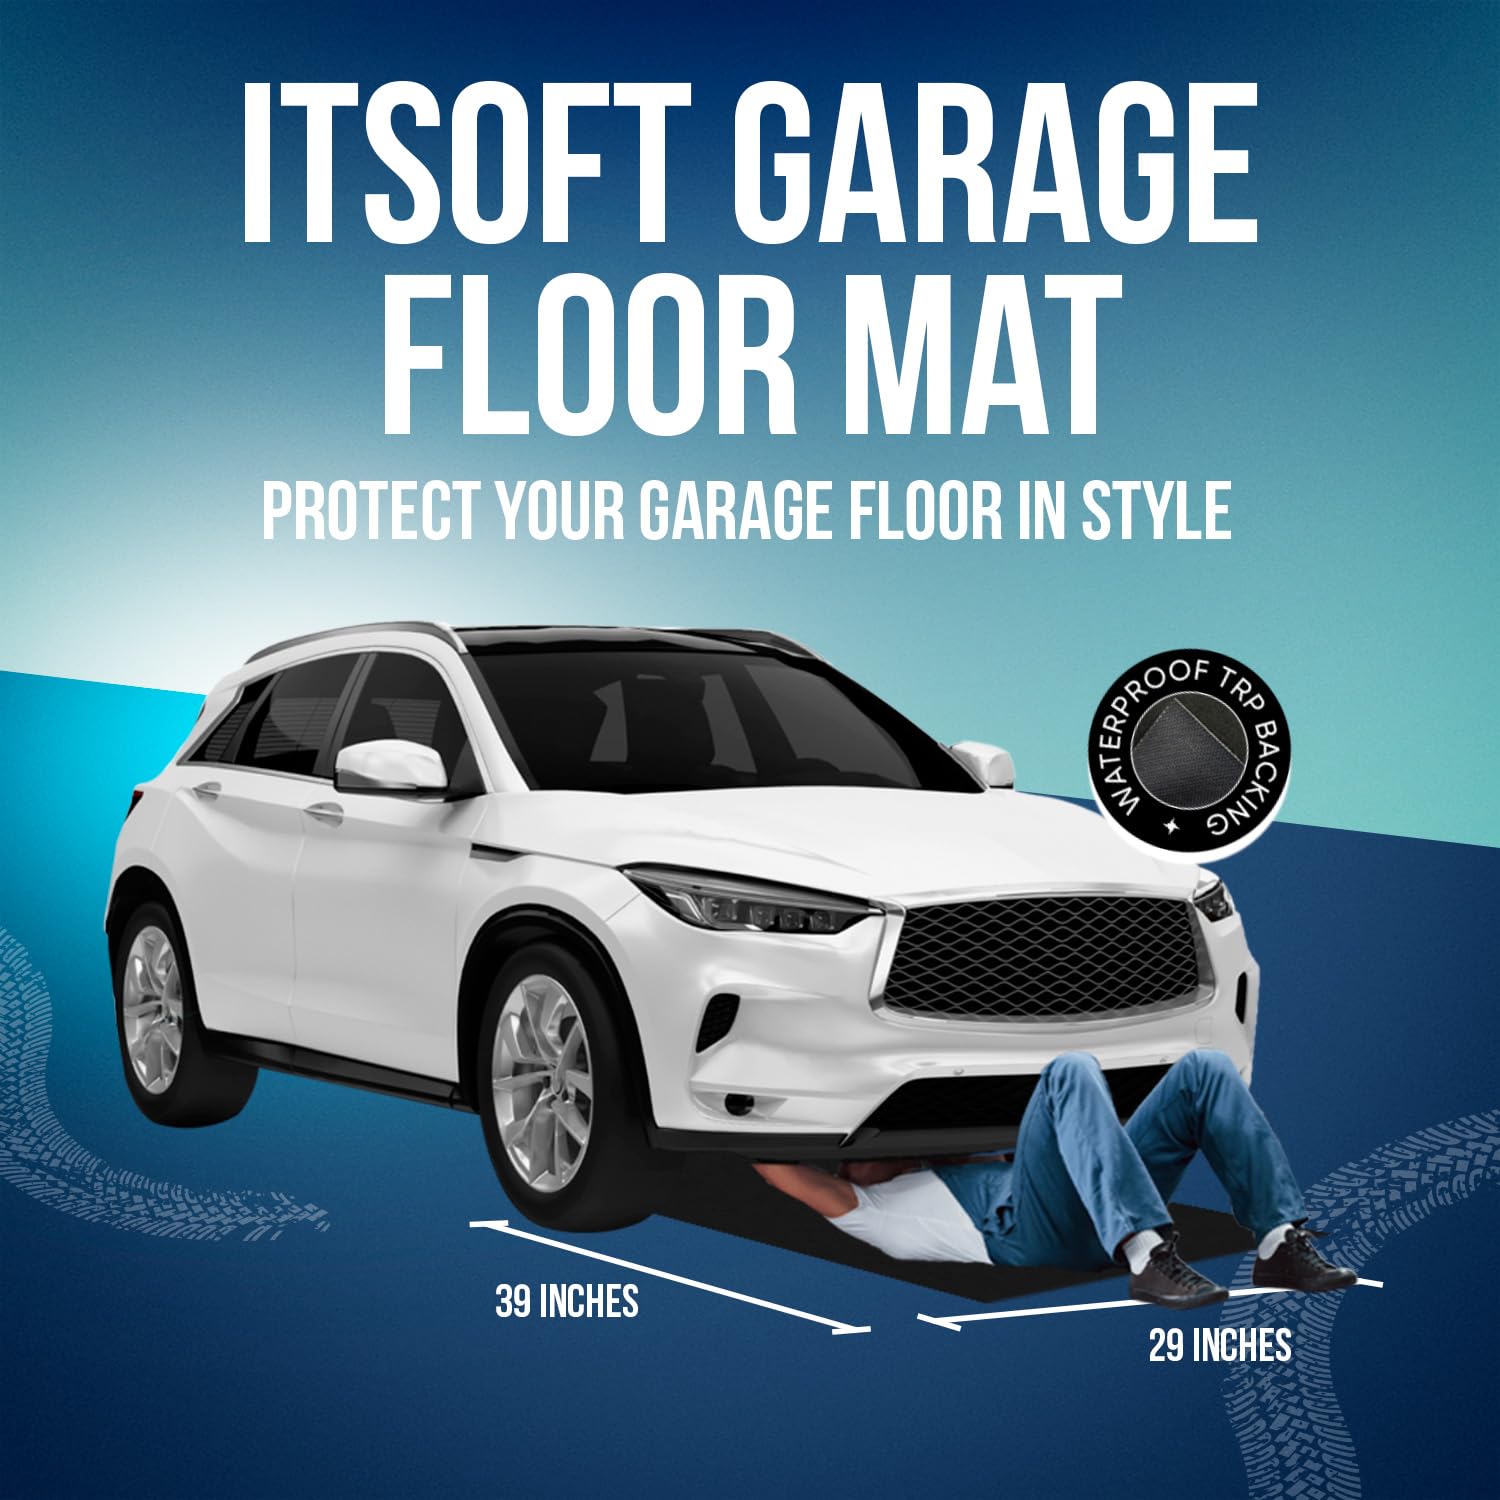 ITSOFT Absorbent Oil Spill Mat Garage Floor and Mechanic Pad 38" x 29" - Protects Floor from Spills, Drips, Splashes and Stains | Washable, Cut to Size, Non Slip and Waterproof Backing Layer